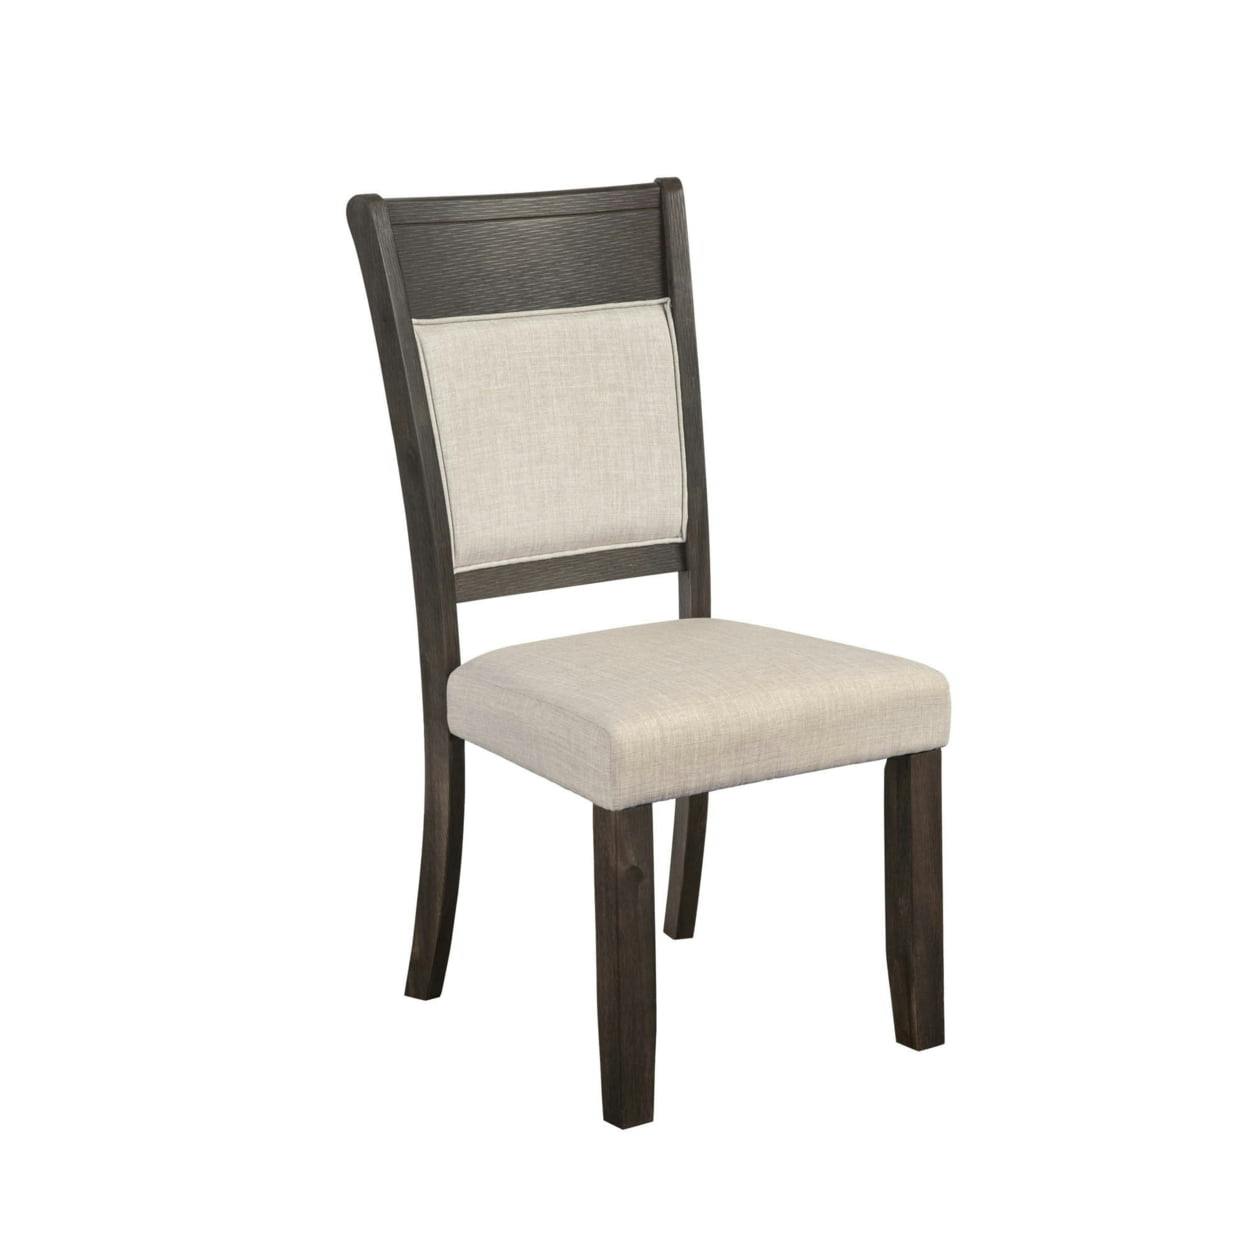 Transitional Beige Upholstered Side Chair with Acacia Wood Frame